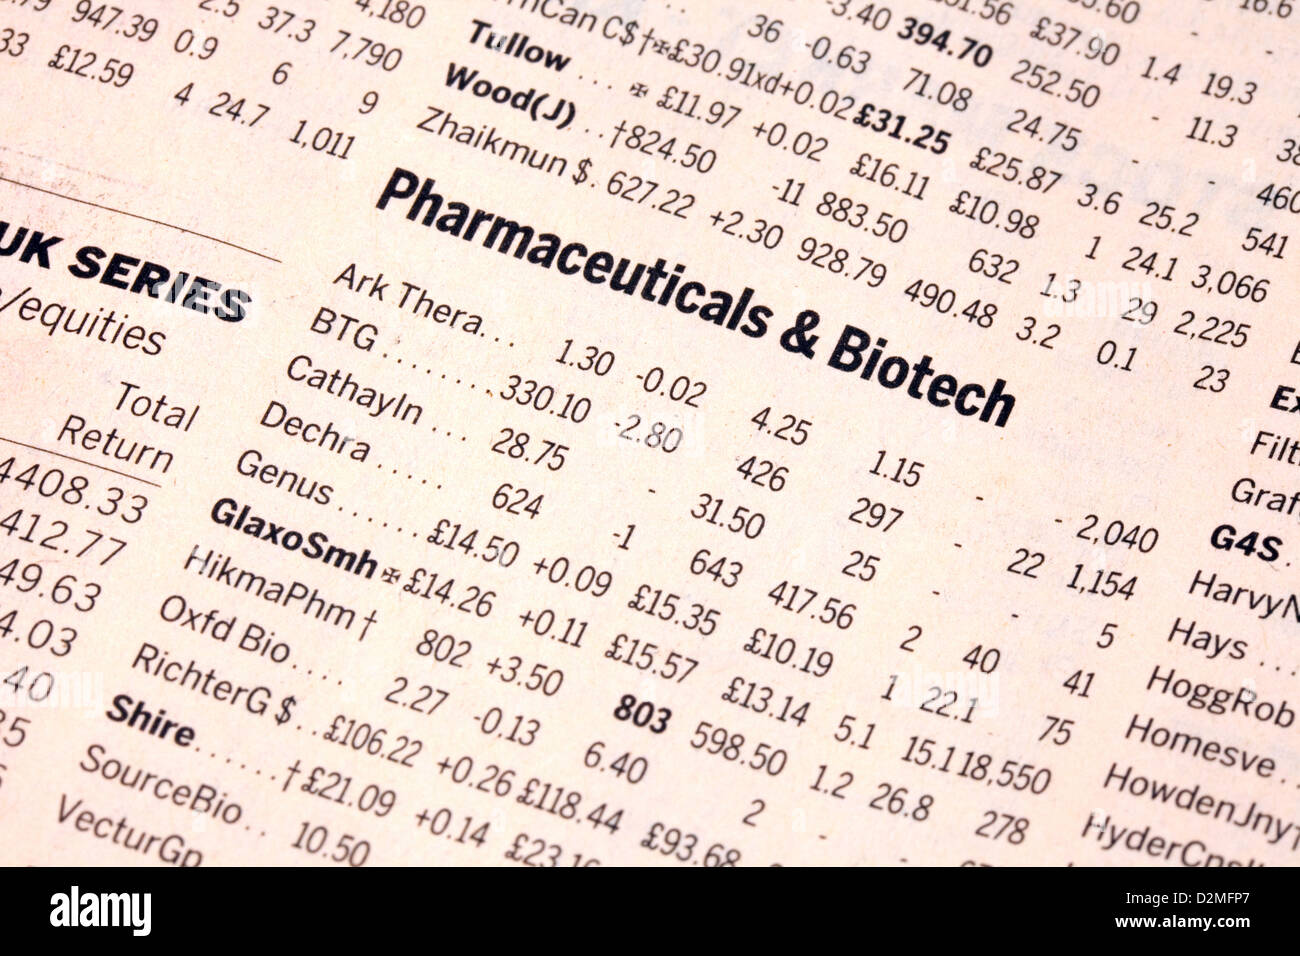 Pharmaceuticals and Biotech stocks and shares listed in the Financial Times newspaper, UK Stock Photo